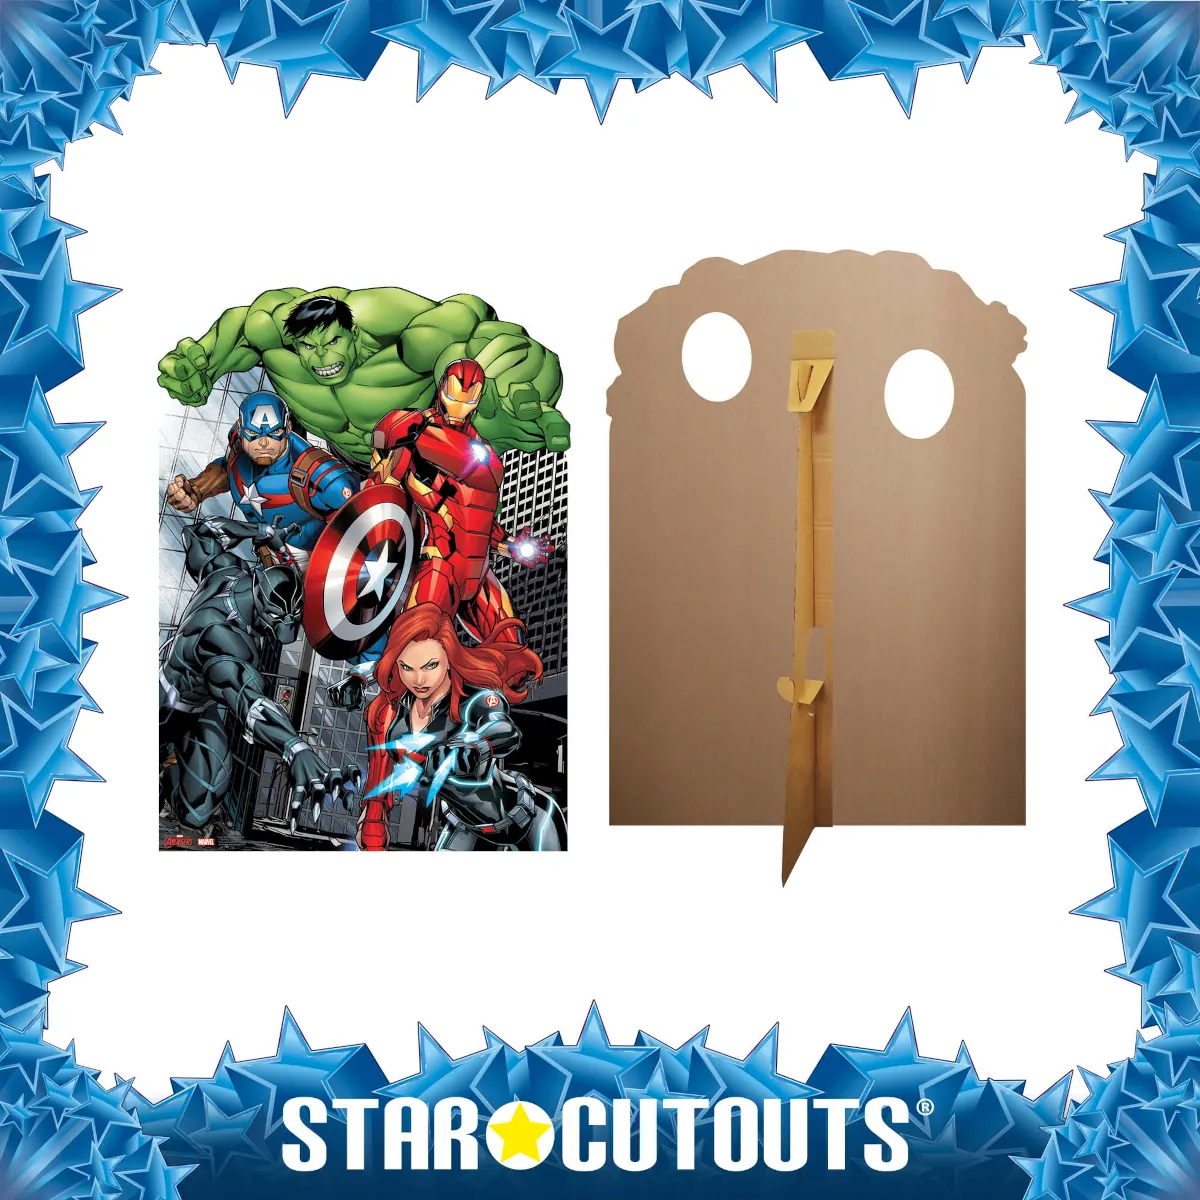 Avengers Assemble (Marvel Avengers) Child Size Stand-In Cardboard Cutout Frame